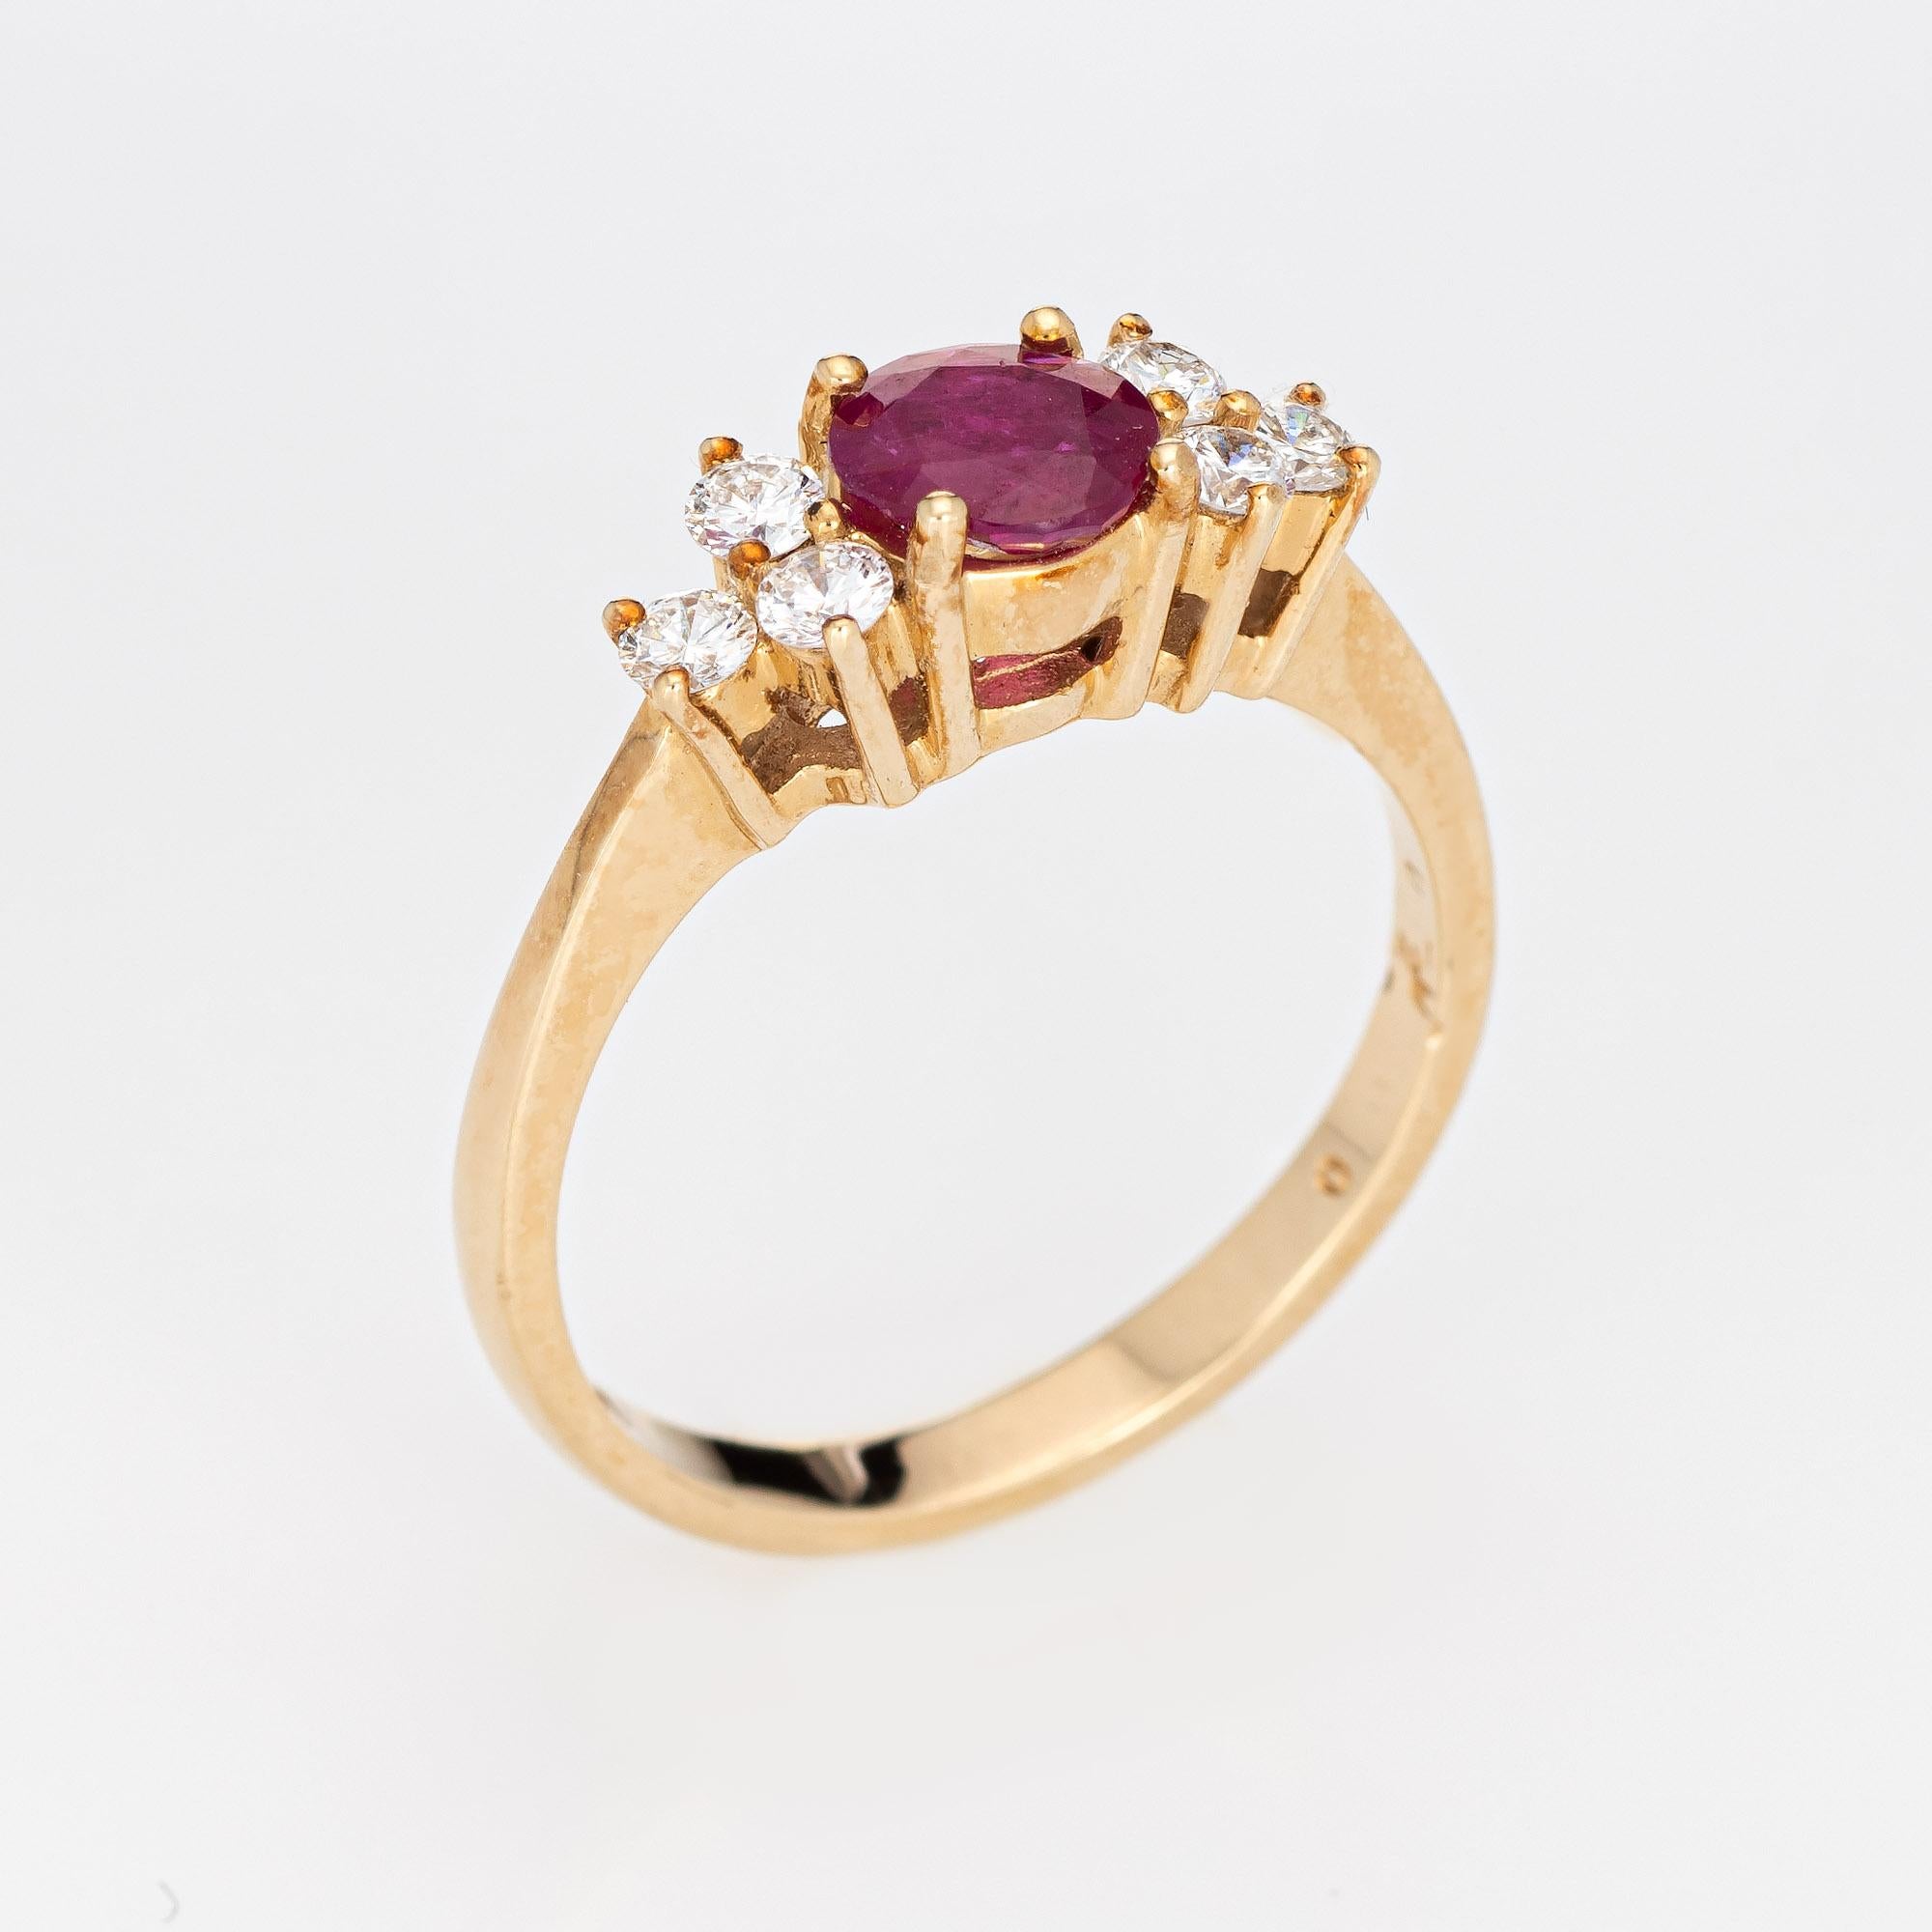 Stylish vintage ruby & diamond ring (circa 1980s to 1990s) crafted in 14 karat yellow gold. 

Faceted round cut natural ruby is estimated at 0.85 carats, accented with six estimated 0.05 carat round brilliant cut diamonds. The total diamond weight